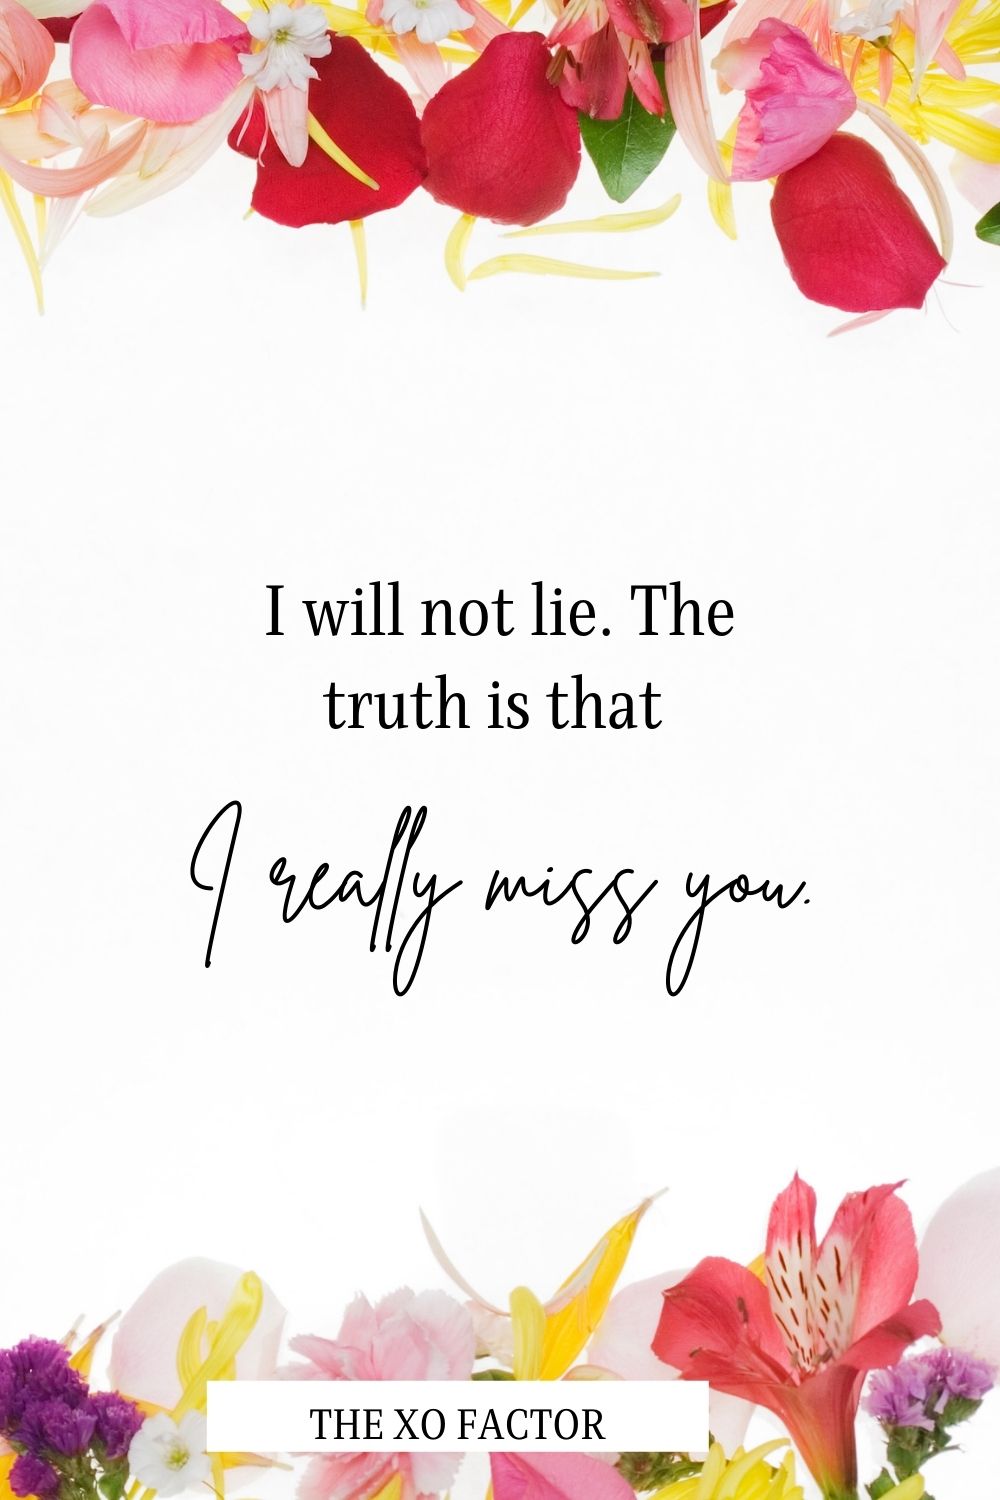 I will not lie. The truth is that I really miss you.